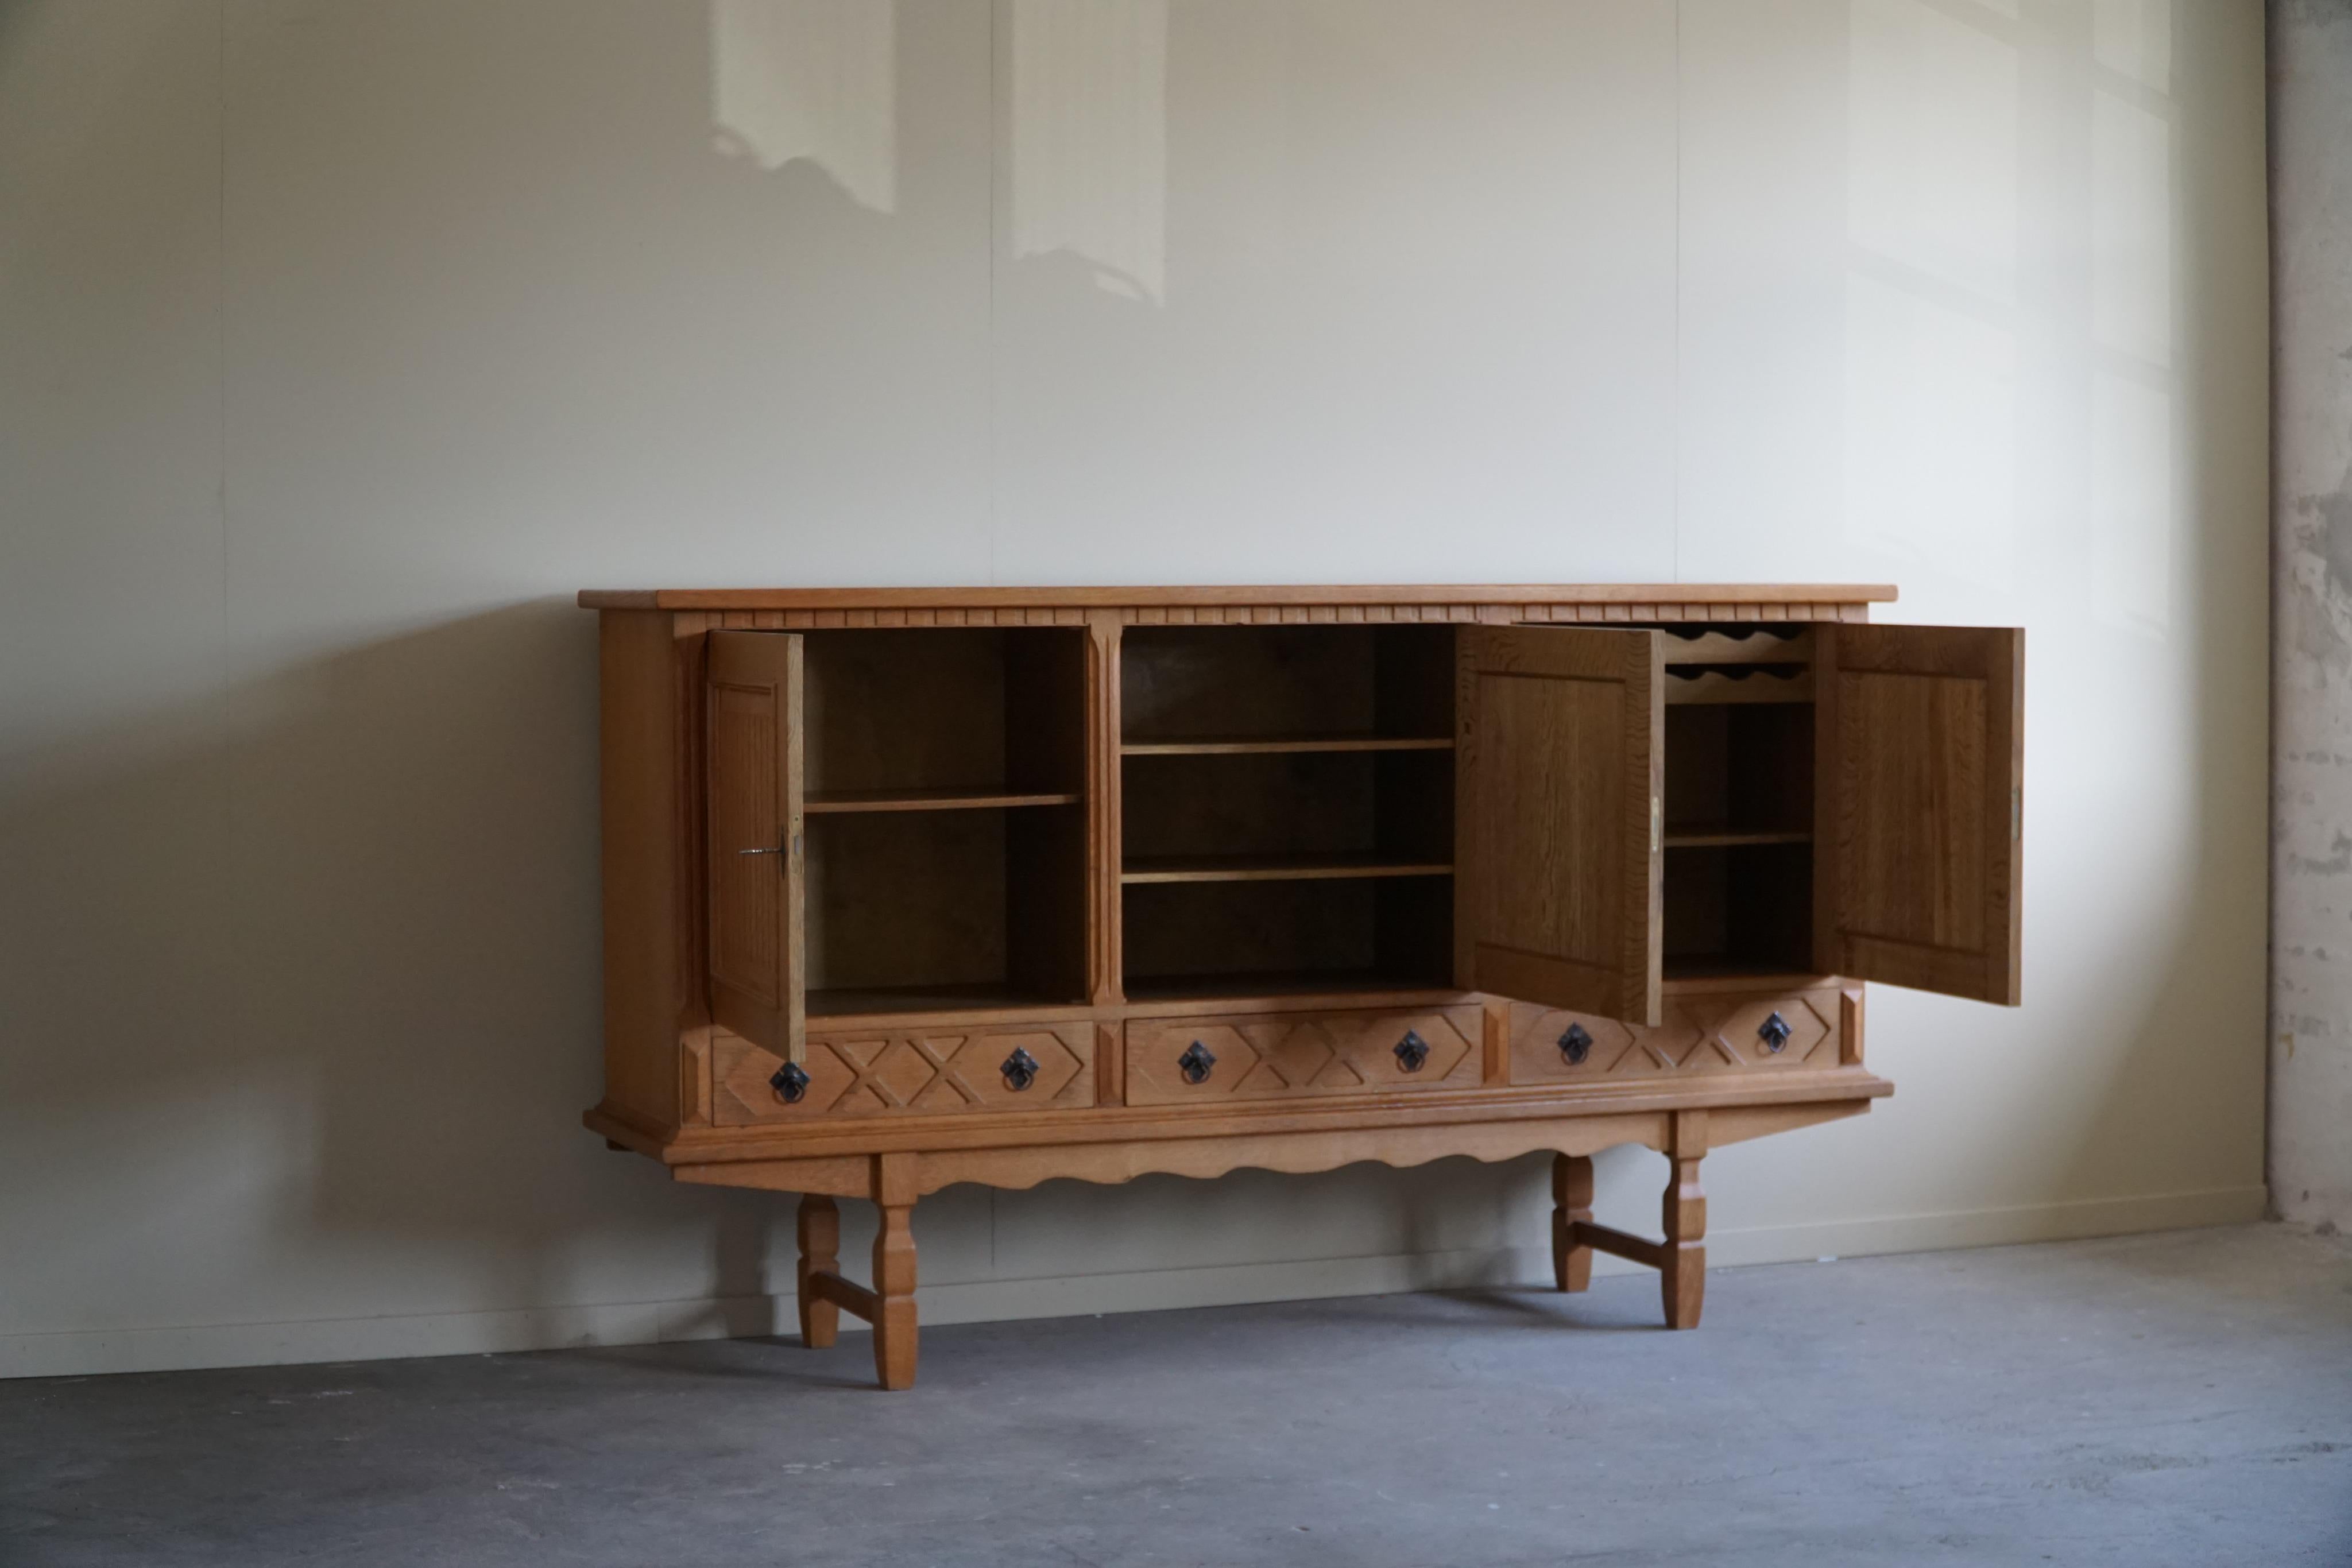 20th Century Midcentury Sideboard in Oak, Made by a Danish Cabinetmaker, 1960s